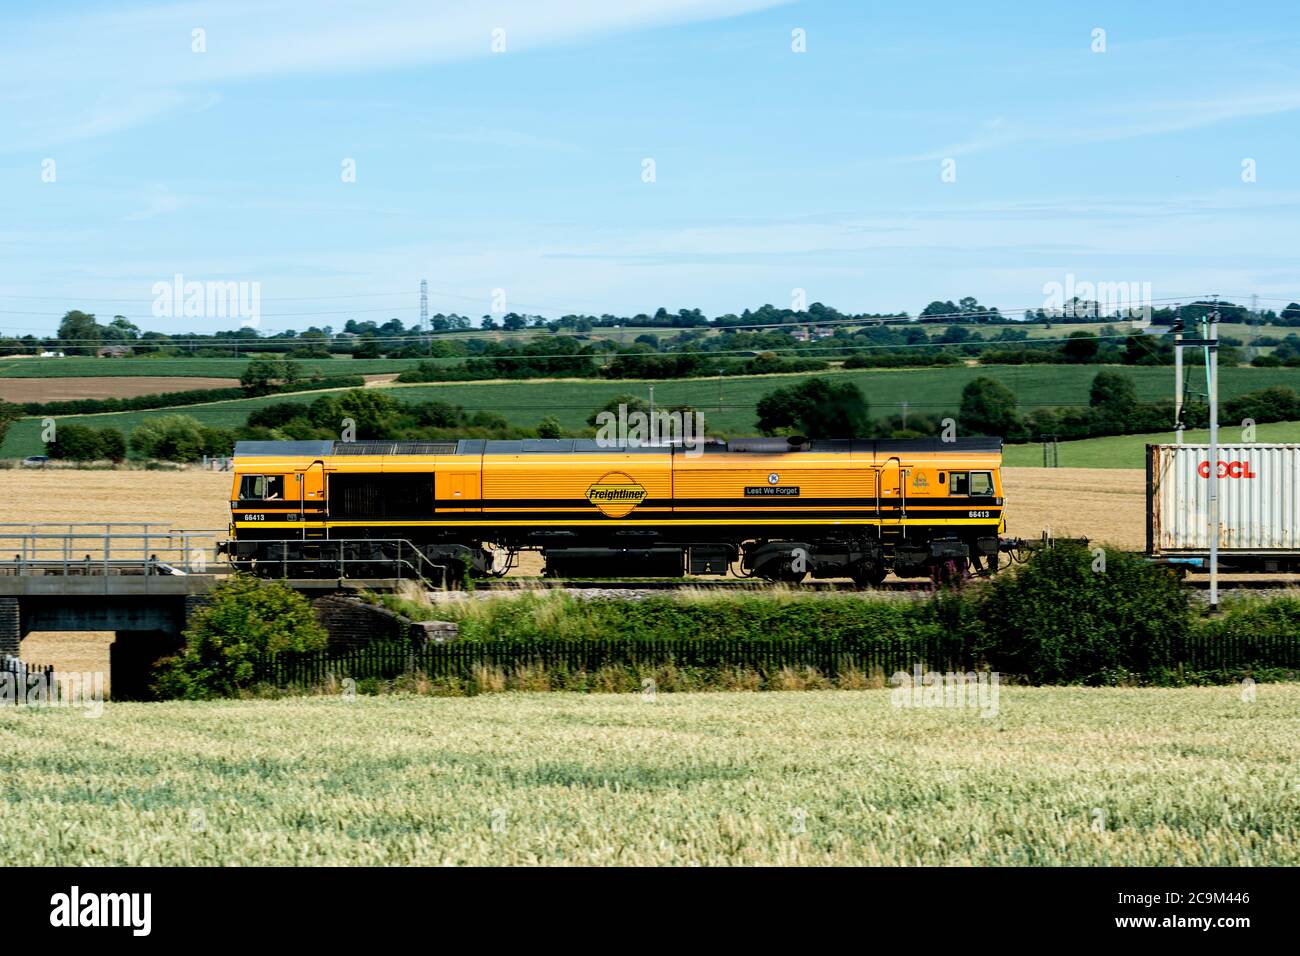 Class 66 diesel locomotive No. 66413 'Lest we forget' pulling a freightliner train on the West Coast Main Line, Northamptonshire, UK Stock Photo